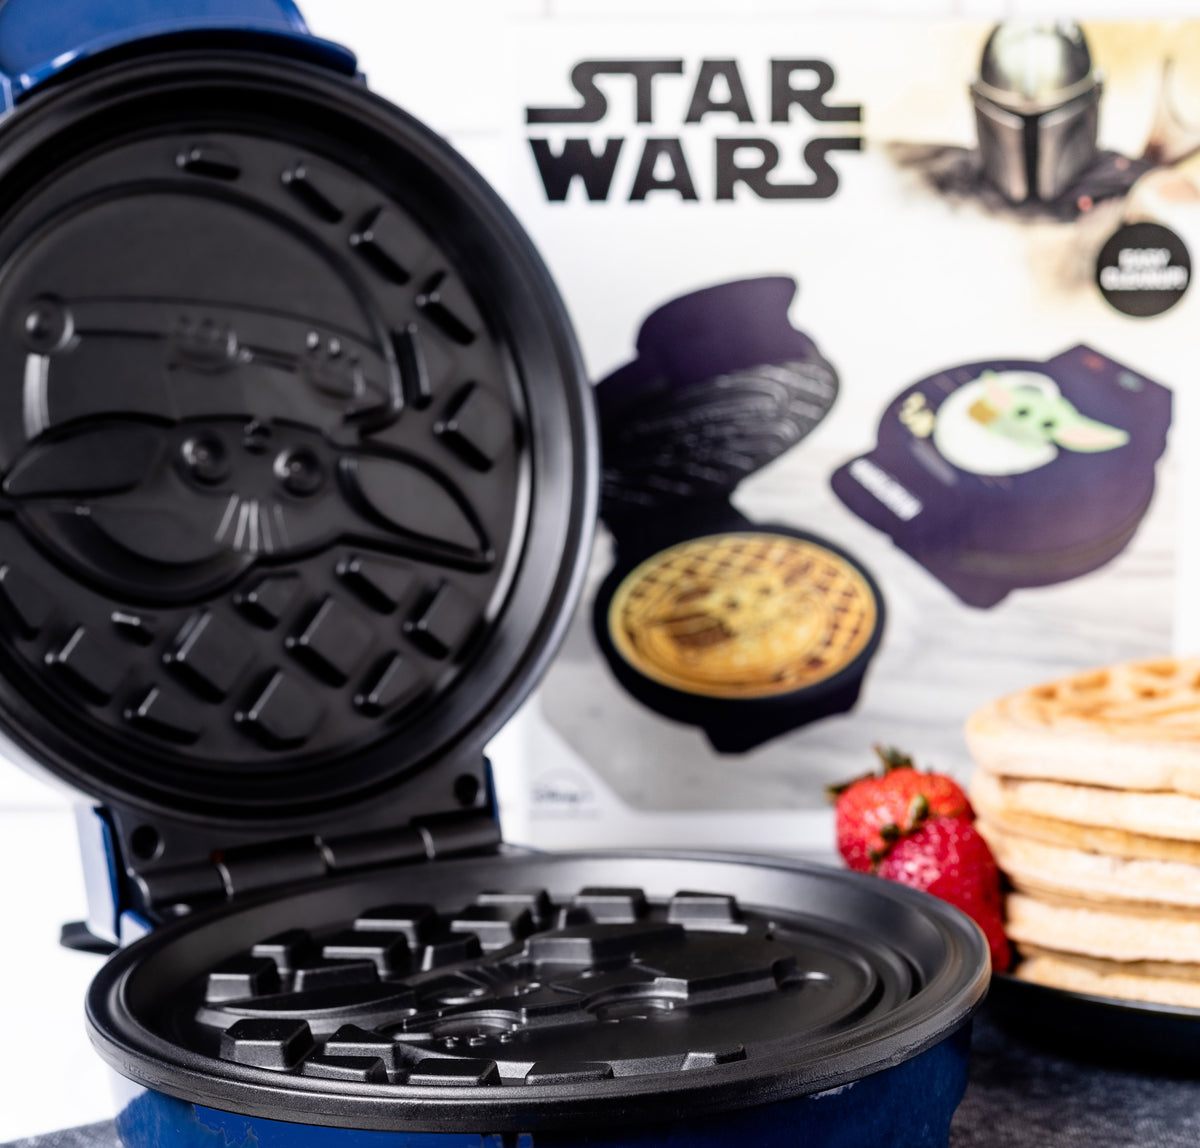 Uncanny Brands Star Wars The Mandalorian 5 Quart Slow Cooker- Easy Cooking  For Baby Yoda- Kitchen Appliance …